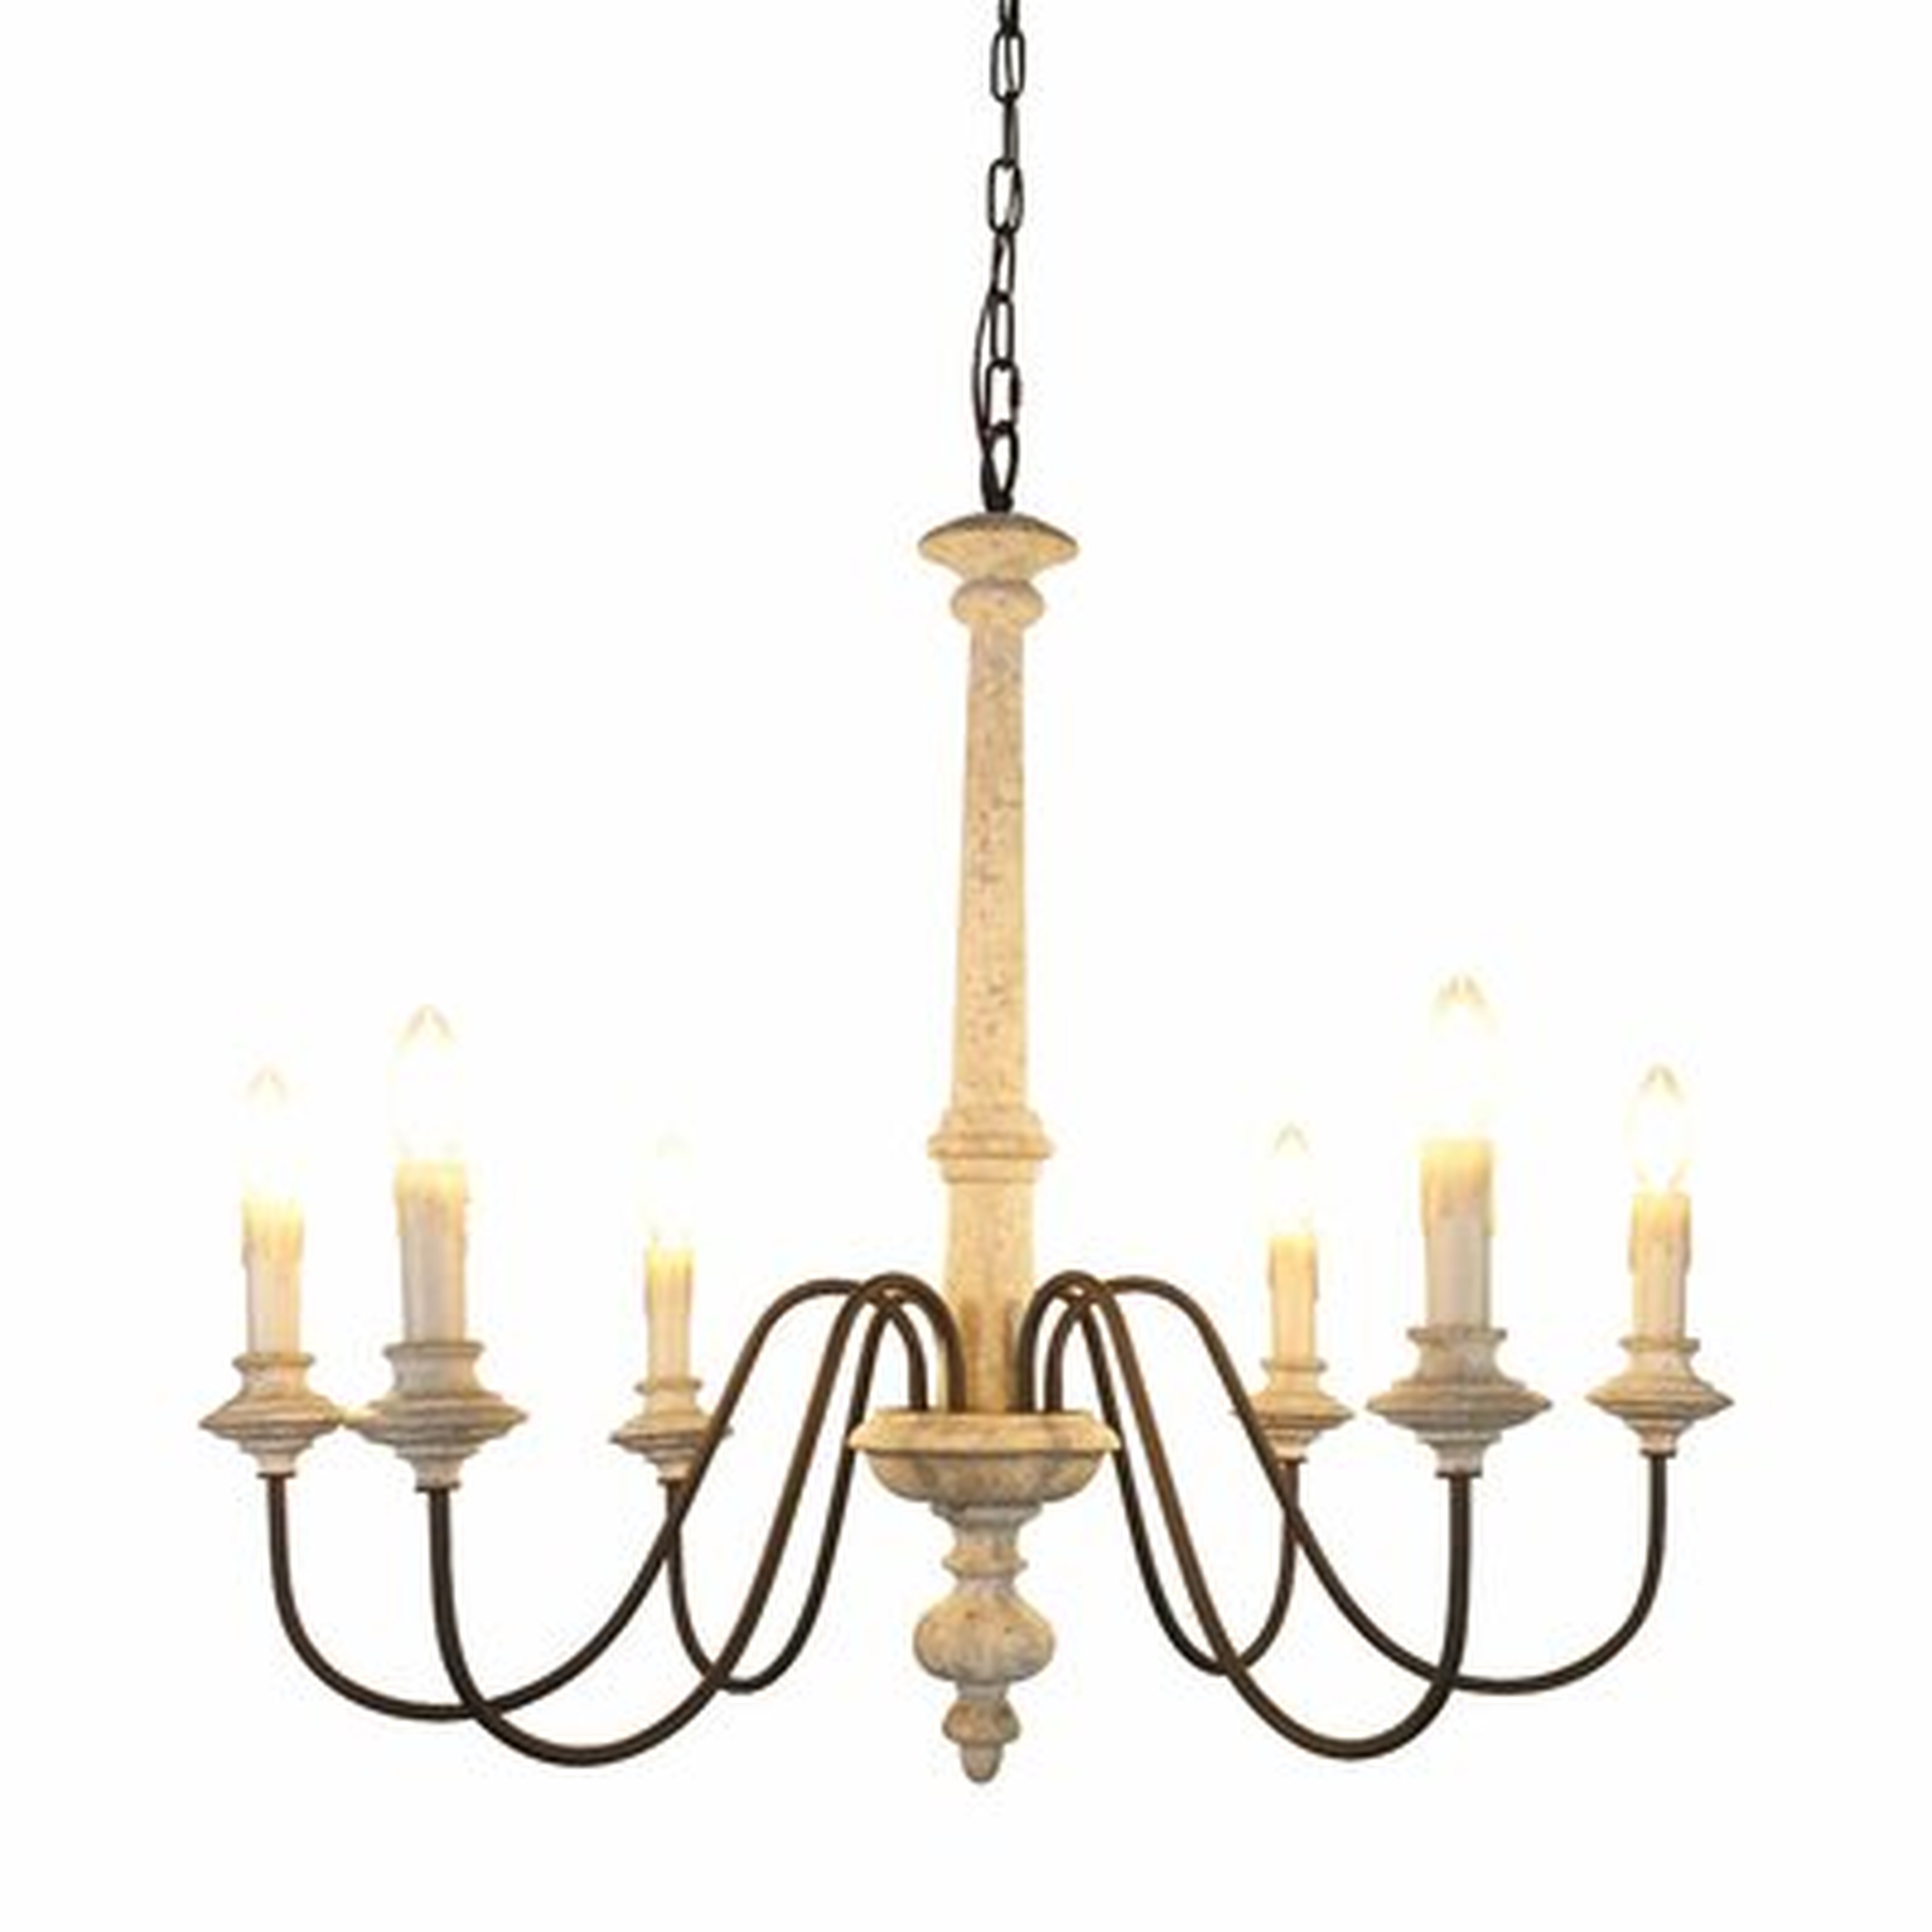 Donnelly Shabby Elegance Wooden 6-Light Candle Style Classic / Traditional Chandelier - Wayfair